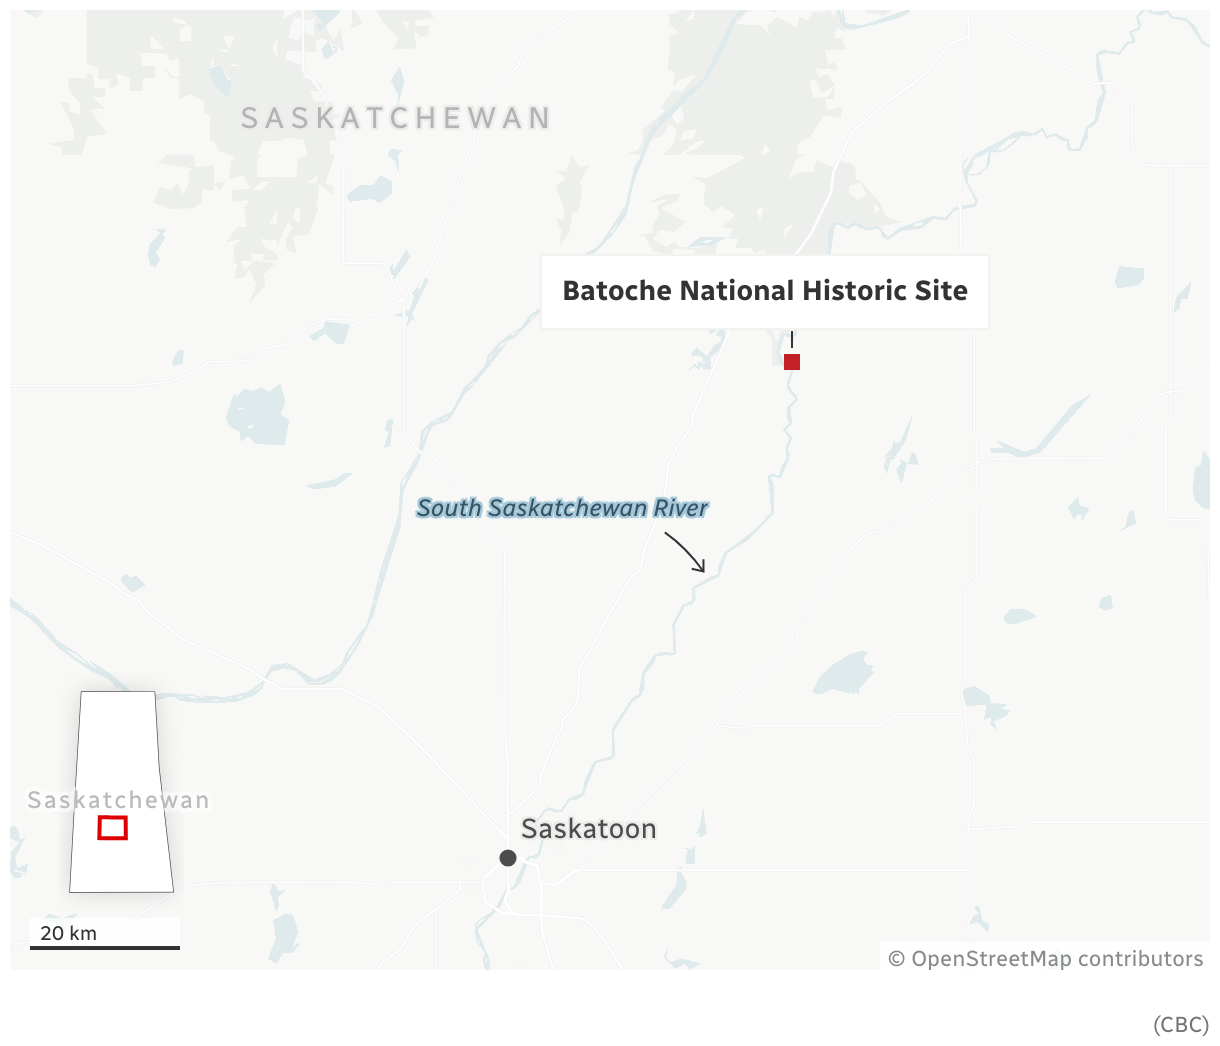 A locator map in neutral green-grey tones and blue colours to locate the Batoche National Historic  Site, the South Saskatchewan River to the south and the city of Saskatoon to the far south. There is also a shape of the province of Saskatchewan in the far right with a red rectangle depicting the boundaries of the larger map.